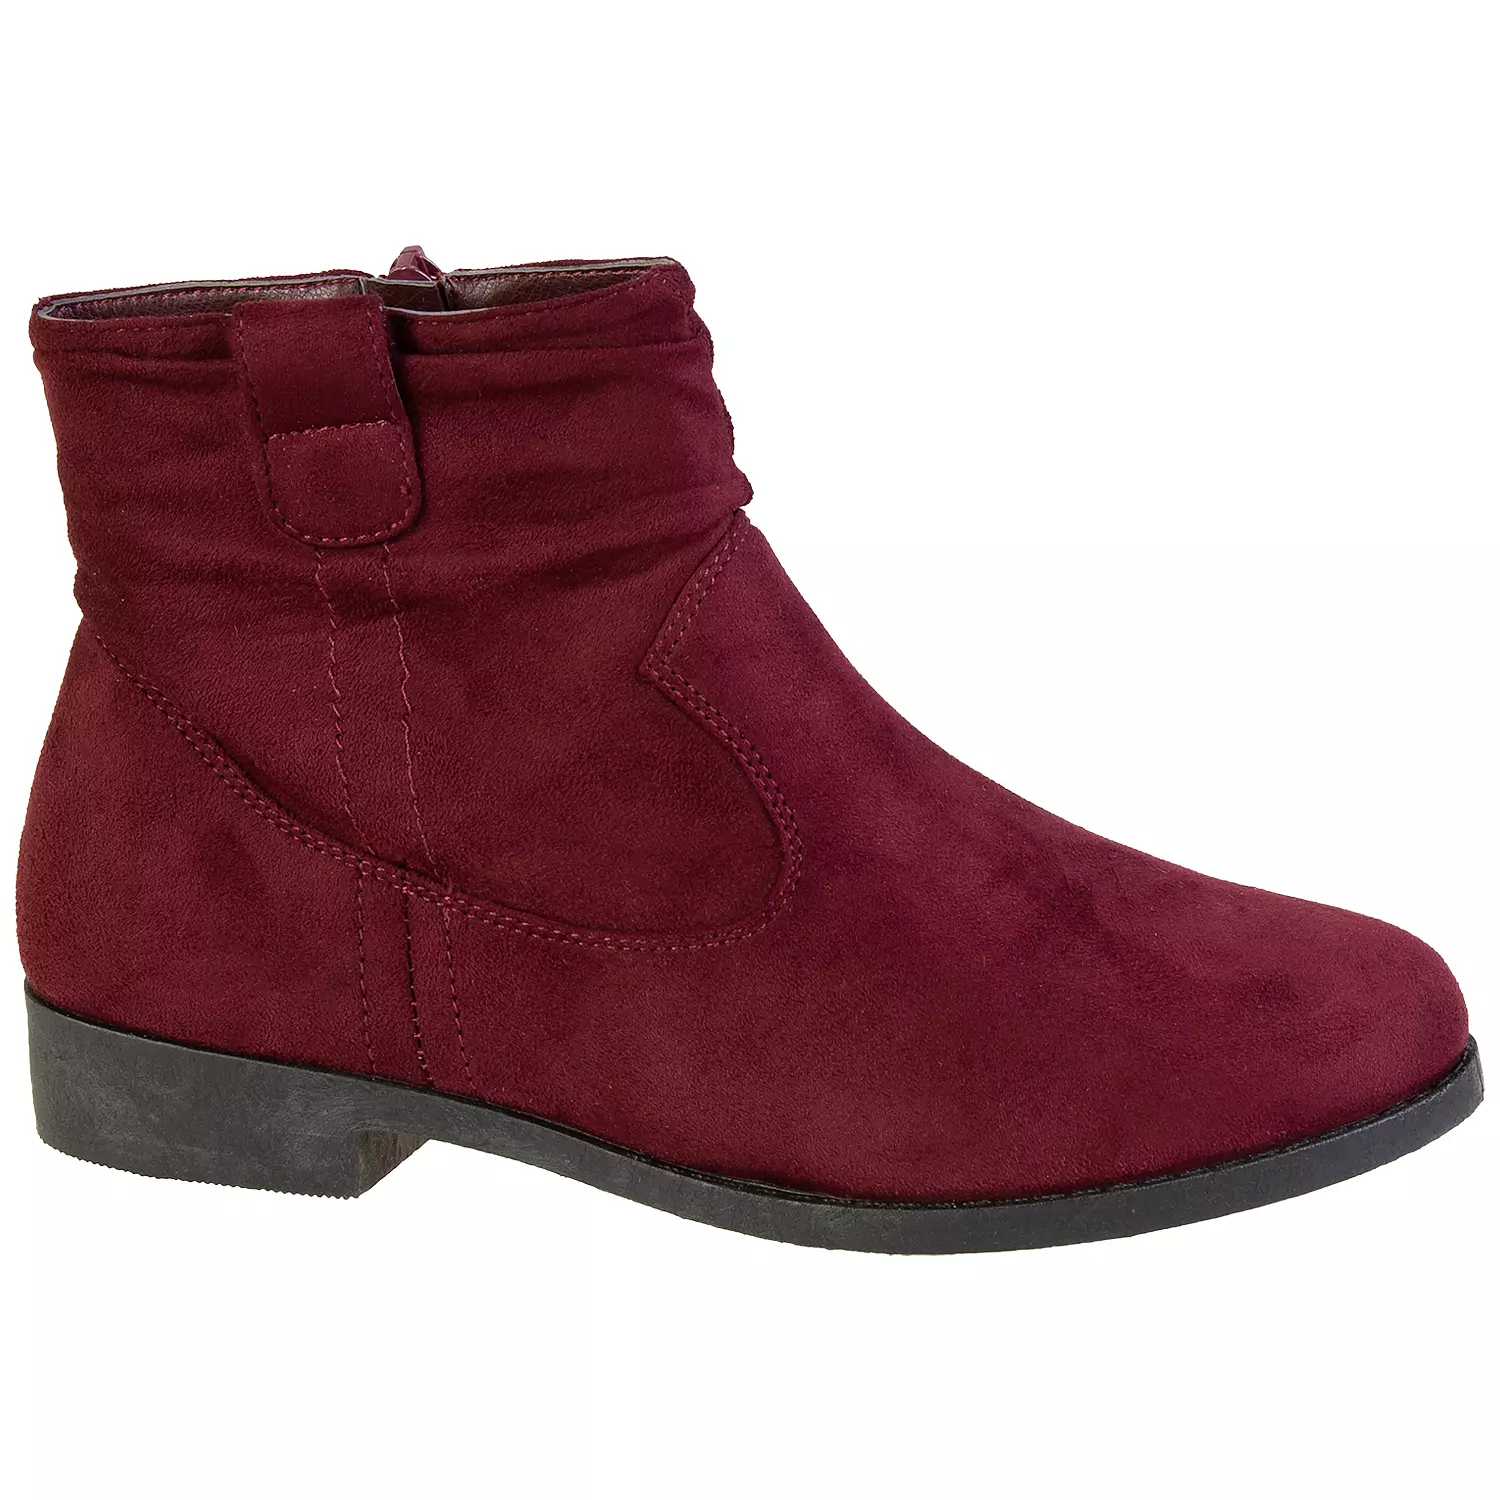 Women's slouch ankle boots with side tabs, burgundy, size 5